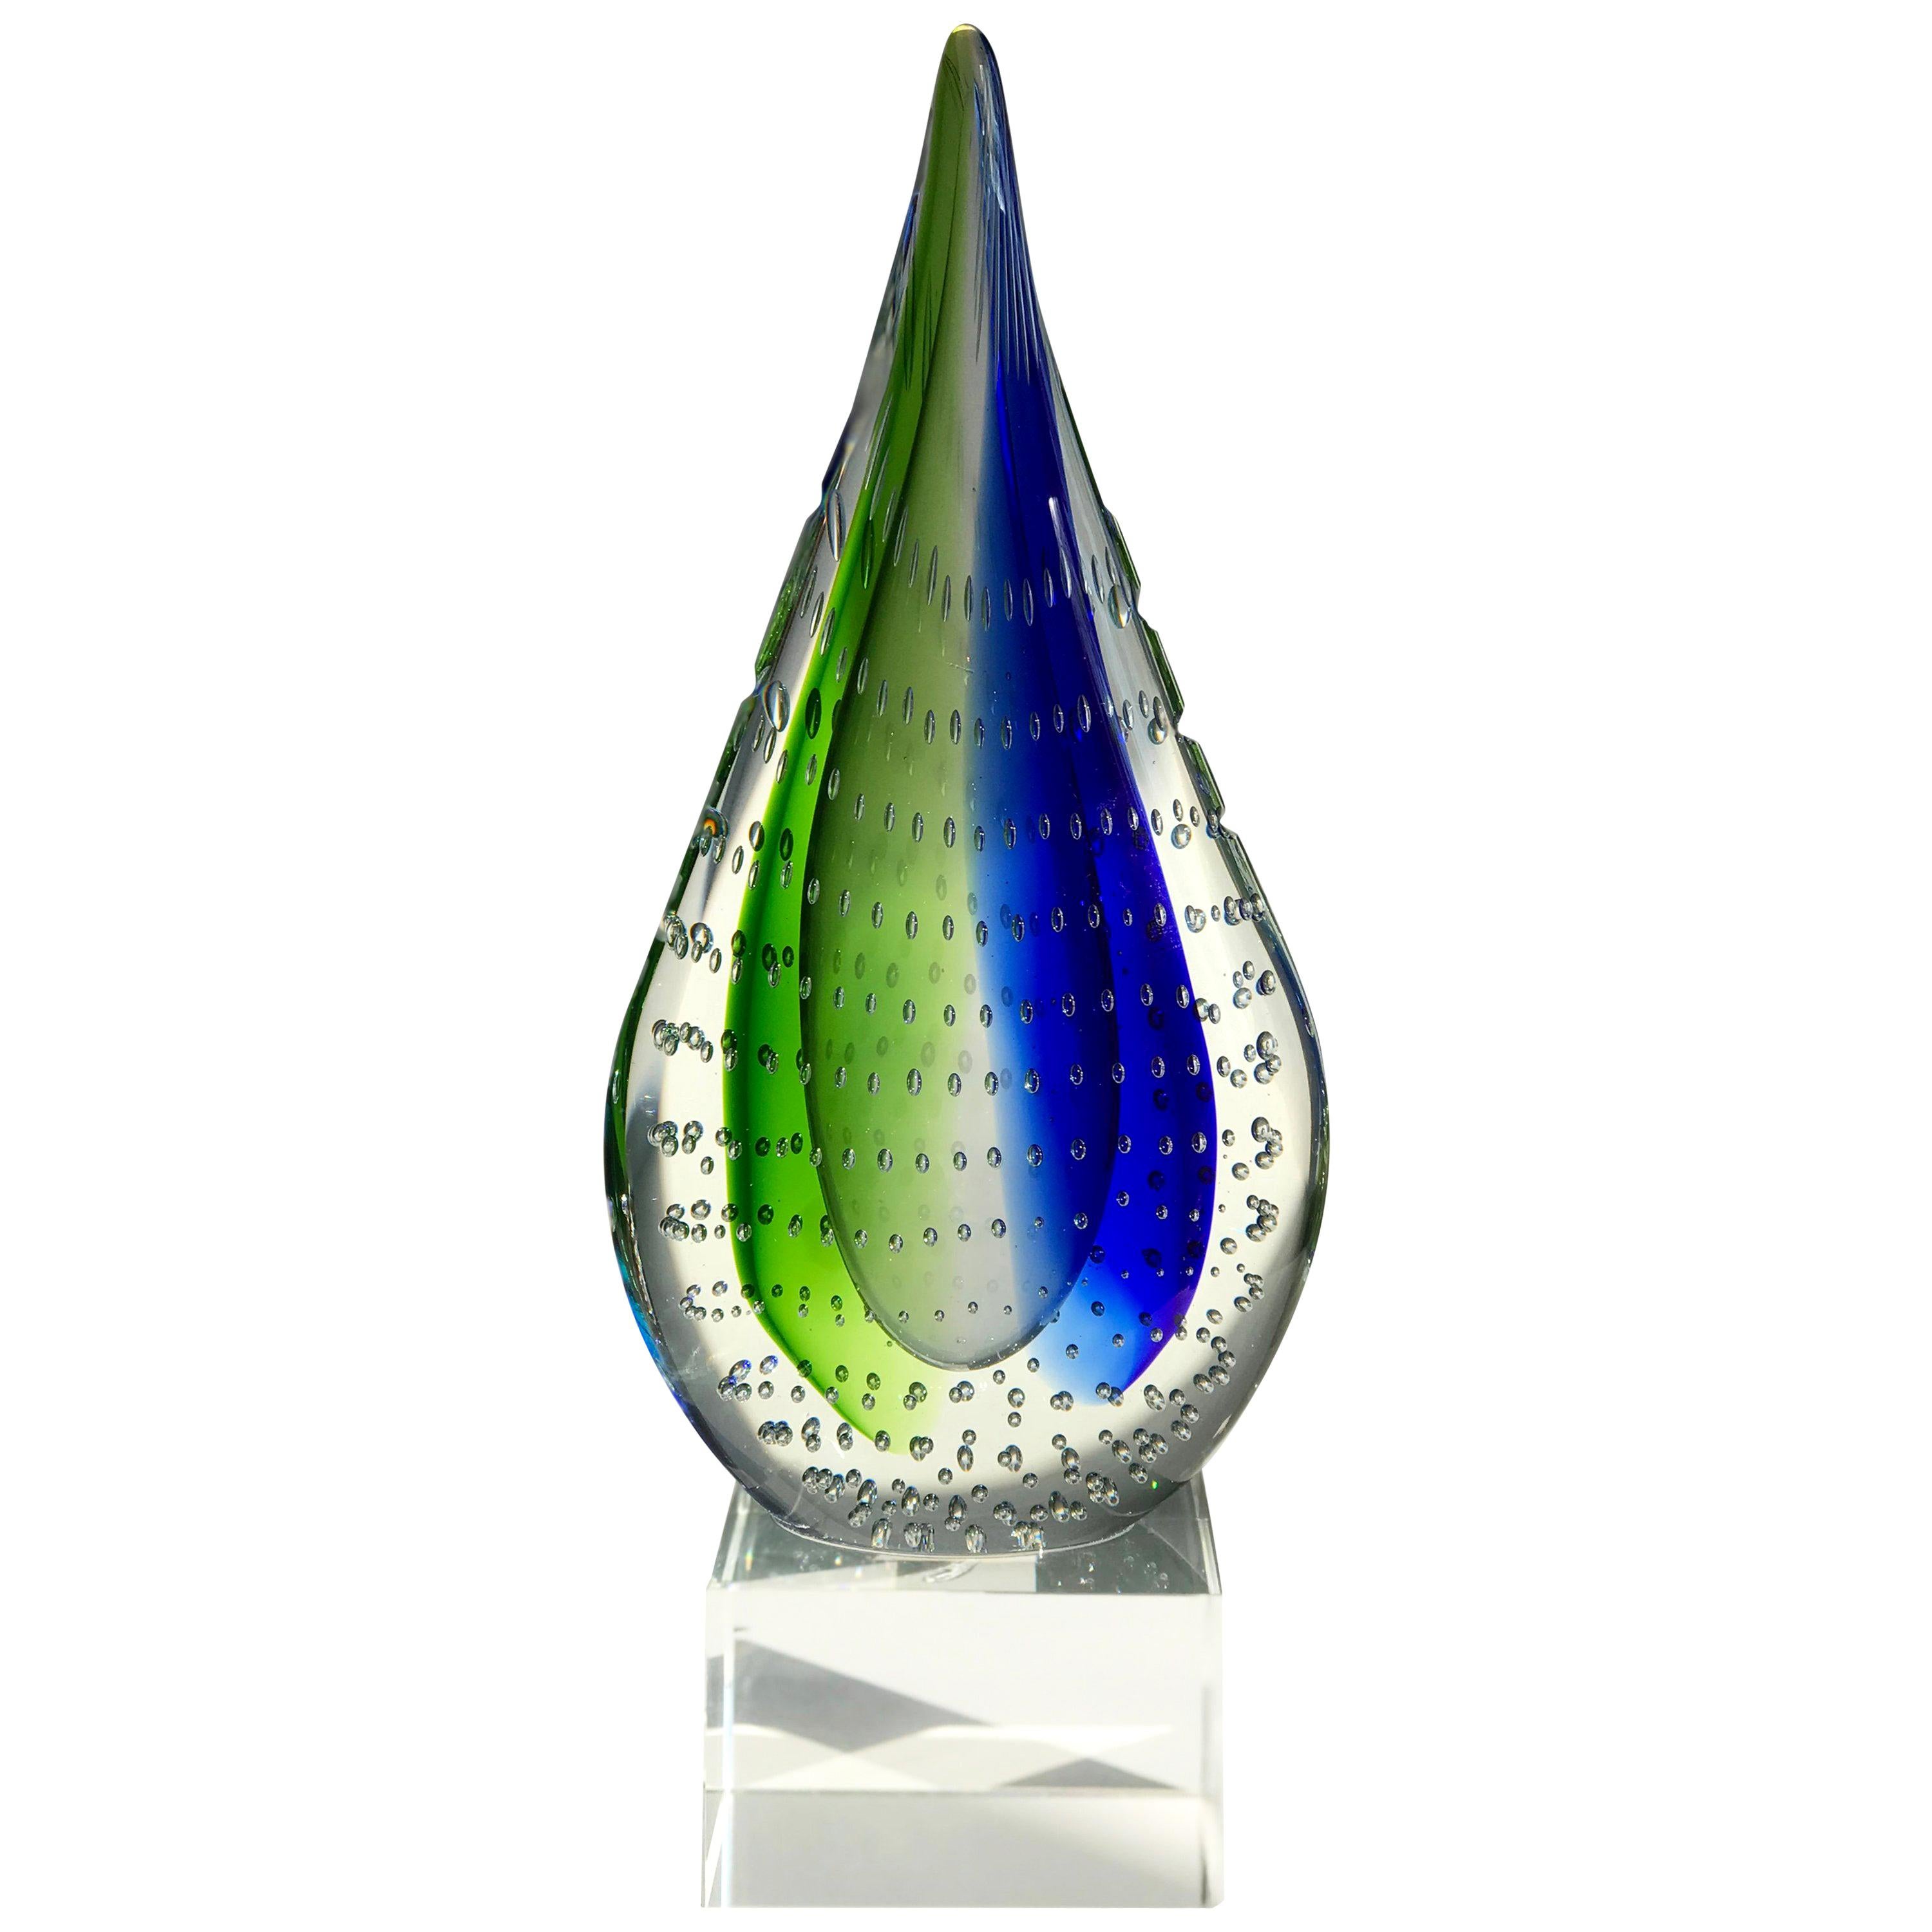 Teardrop Sculpture in Green and Blue Sommerso Blown Glass, circa 1980s